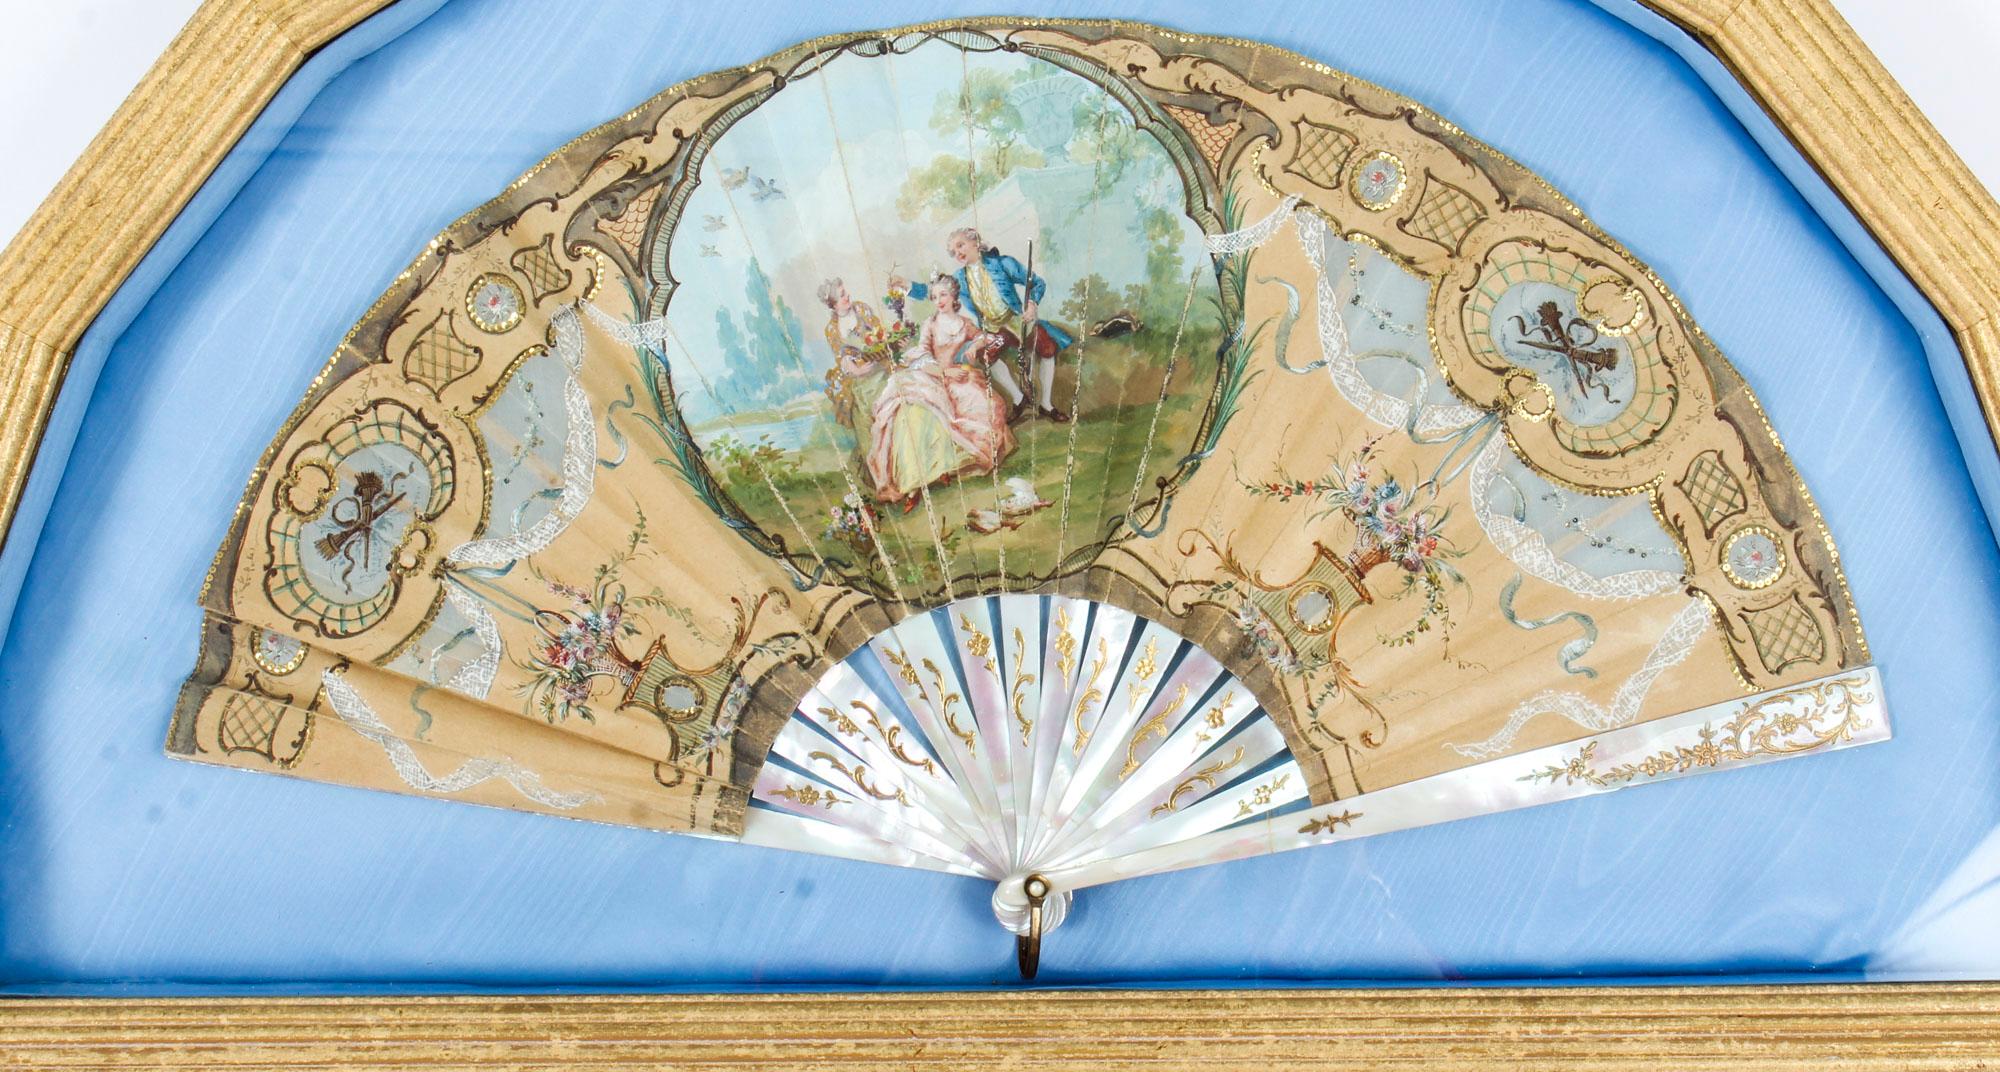 This is a stunning antique English Victorian hand painted and mother of pearl fan set in a gilded frame, dating from the late 19th Century.

The fan is beautifully hand painted with a central cartouche featuring a lovely rustic scene of young